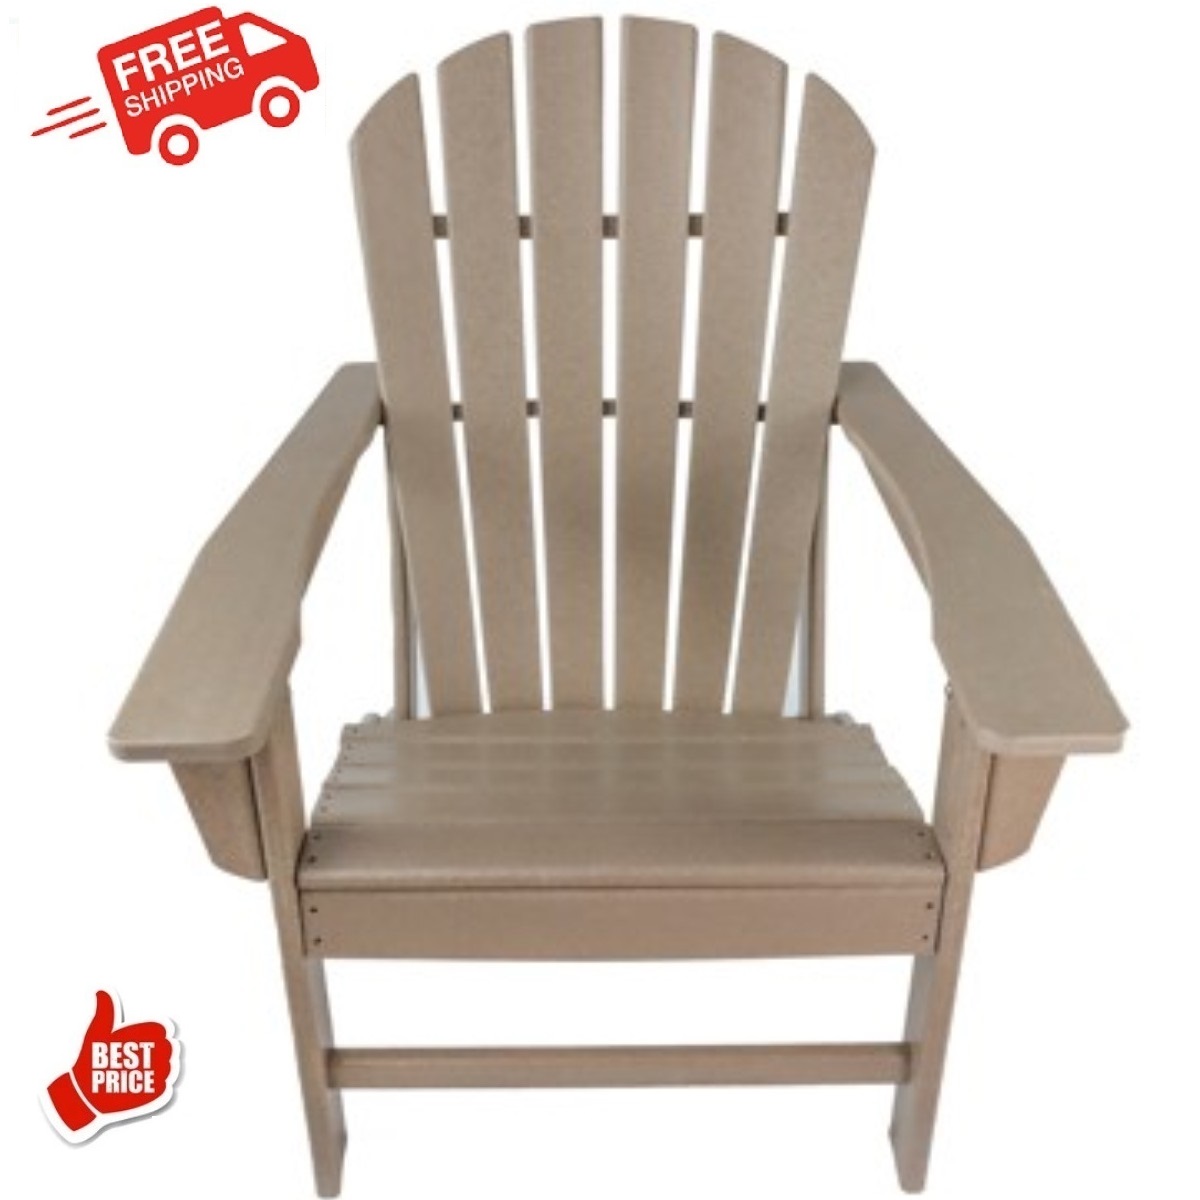 Folding Adirondack Chair Patio Chair Lawn Chair Outdoor 350 lbs Capacity Load Adirondack Chairs Weather Resistant for Patio Deck Garden 33.07*31.1*36.4" HDPE Resin Wood,Brown - image 3 of 8